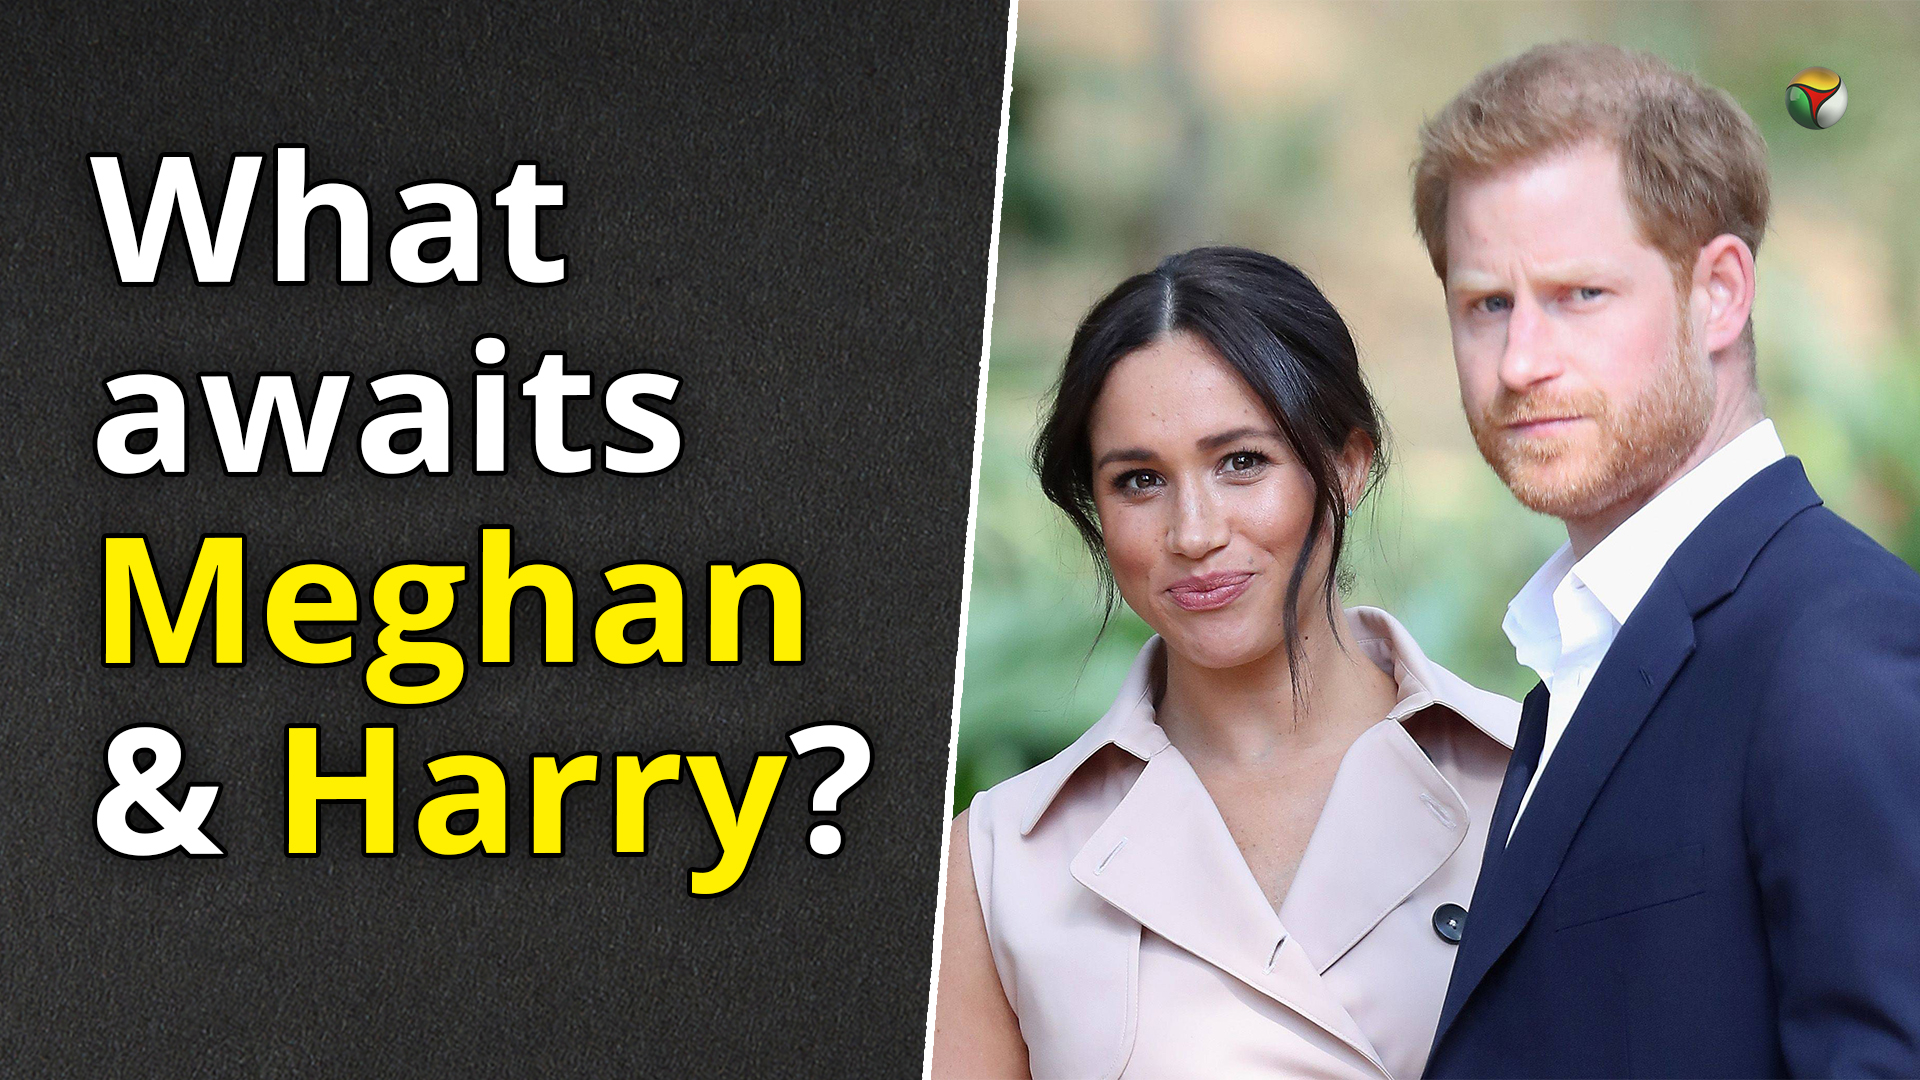 What awaits Meghan and Harry as they move away from British royalty?